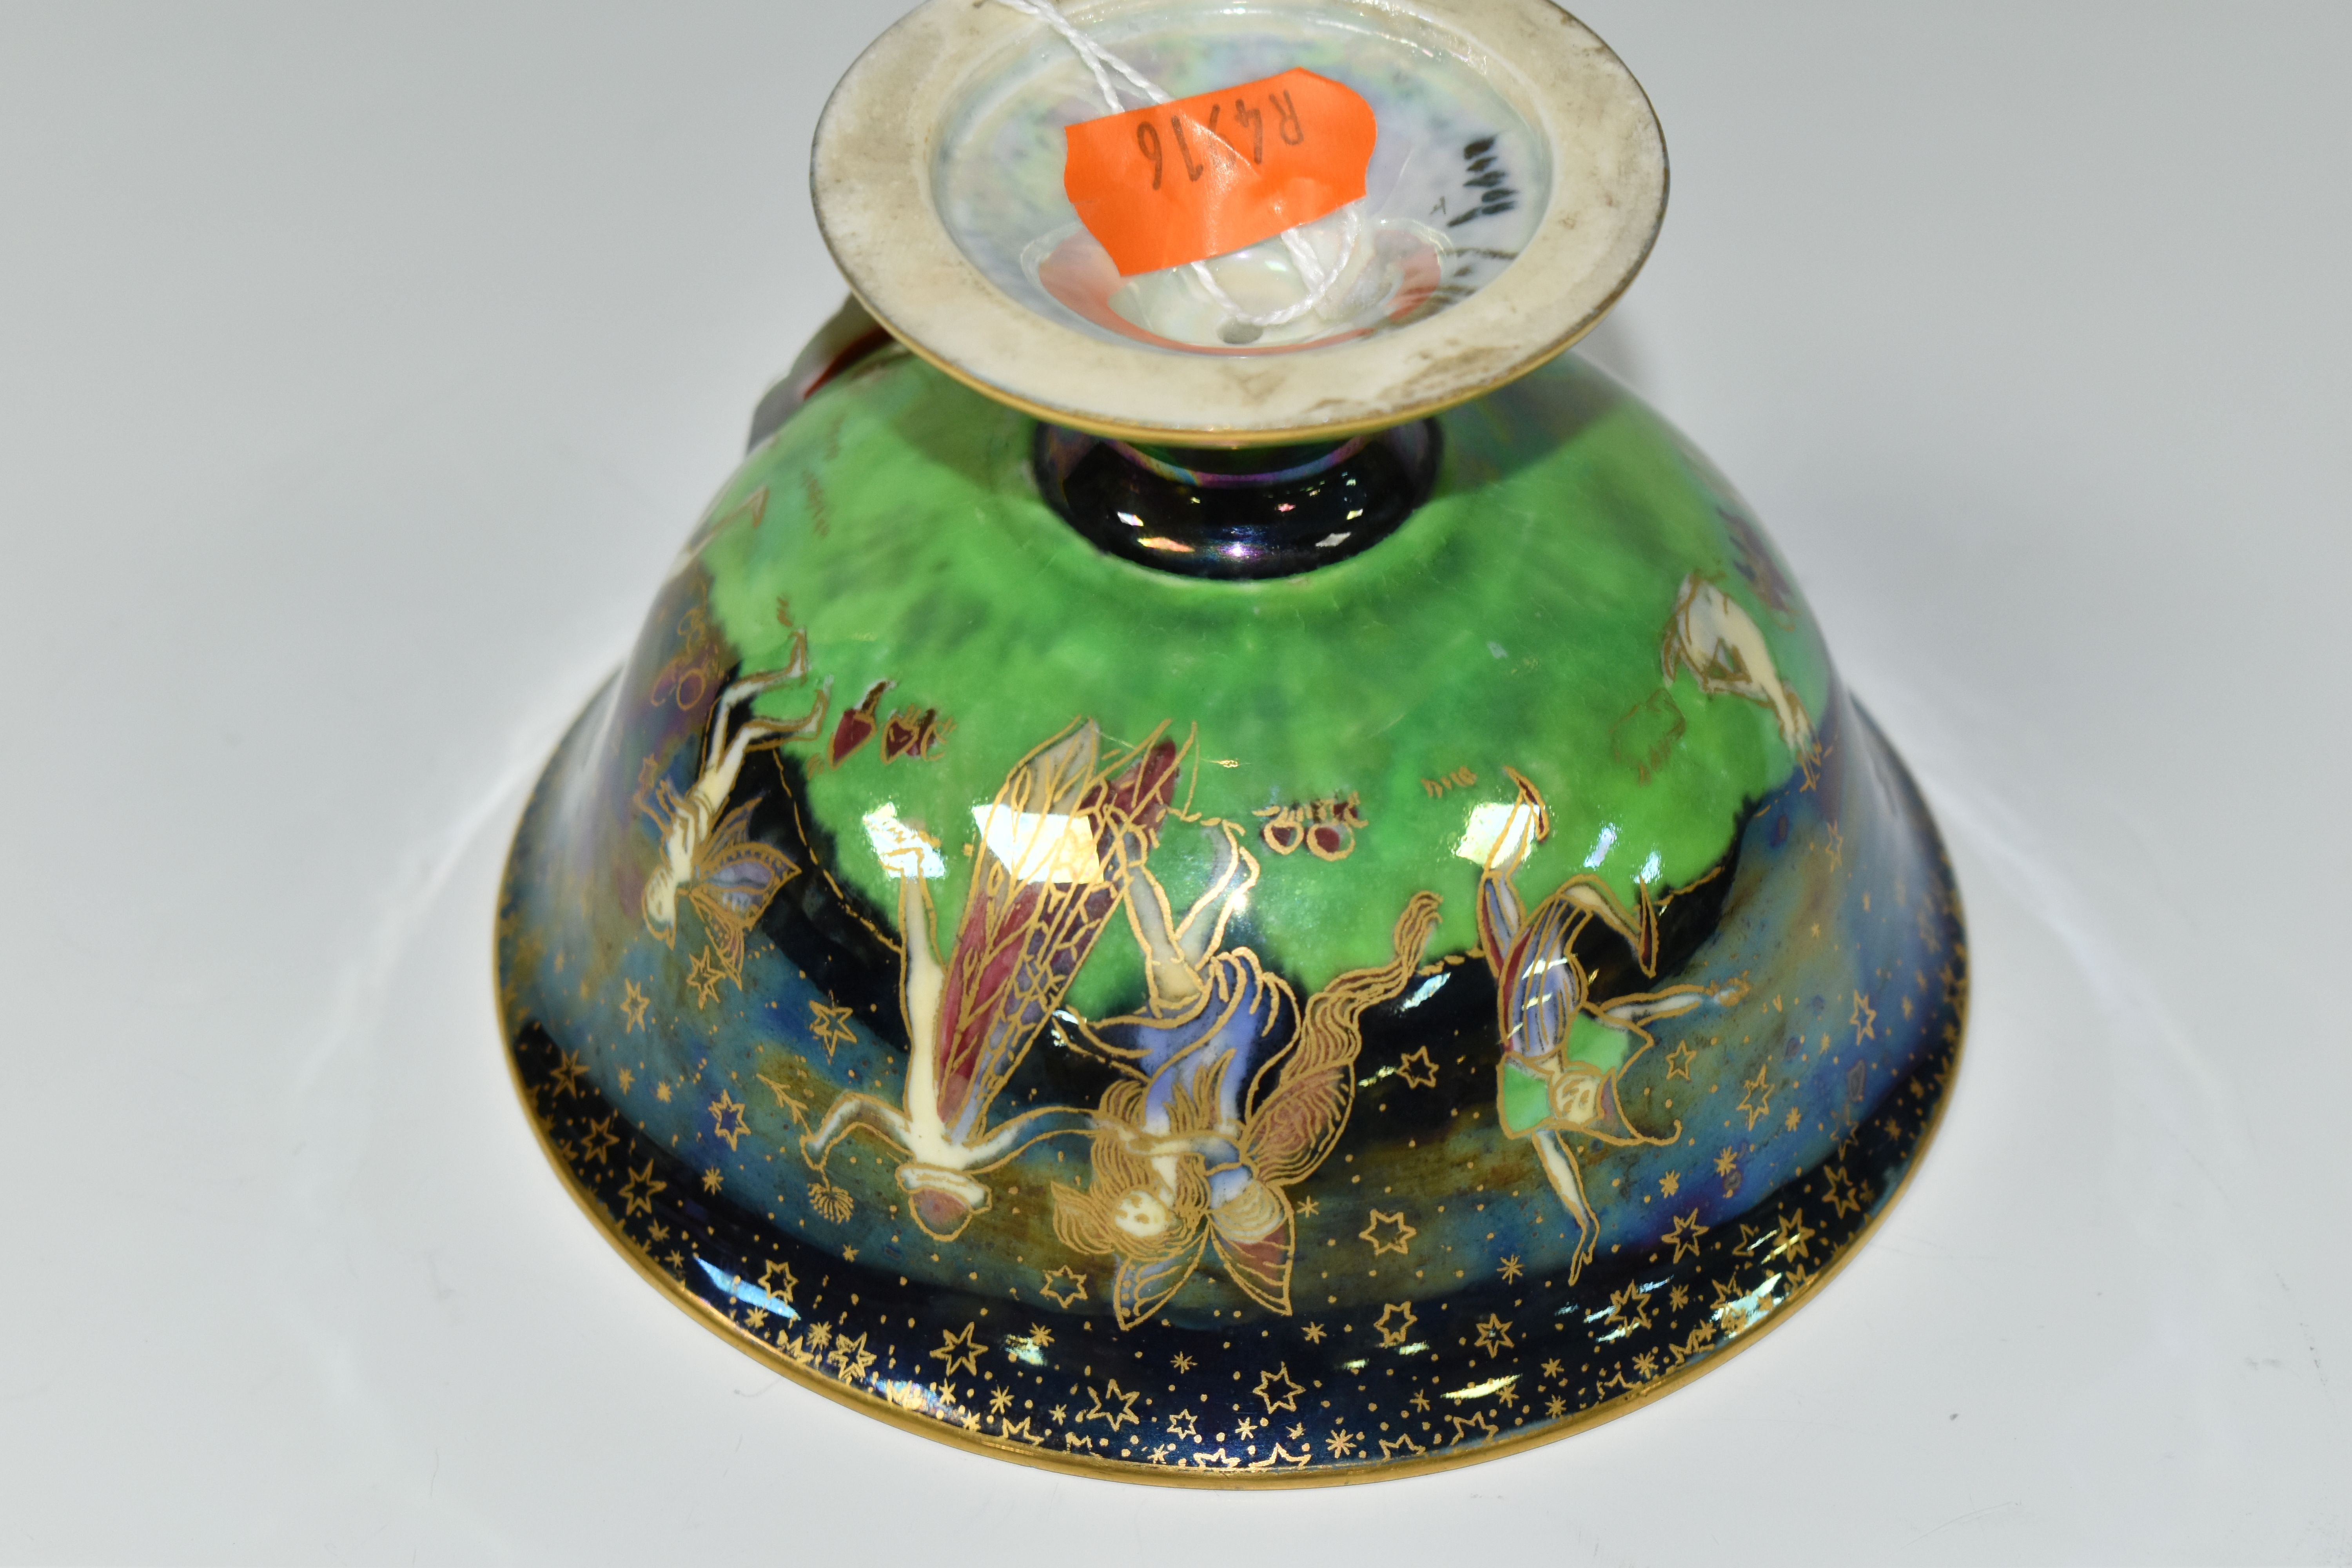 A WEDGWOOD FAIRYLAND LUSTRE FOOTED BOWL, decorated with a mother of pearl lustre with fairies in - Image 8 of 9